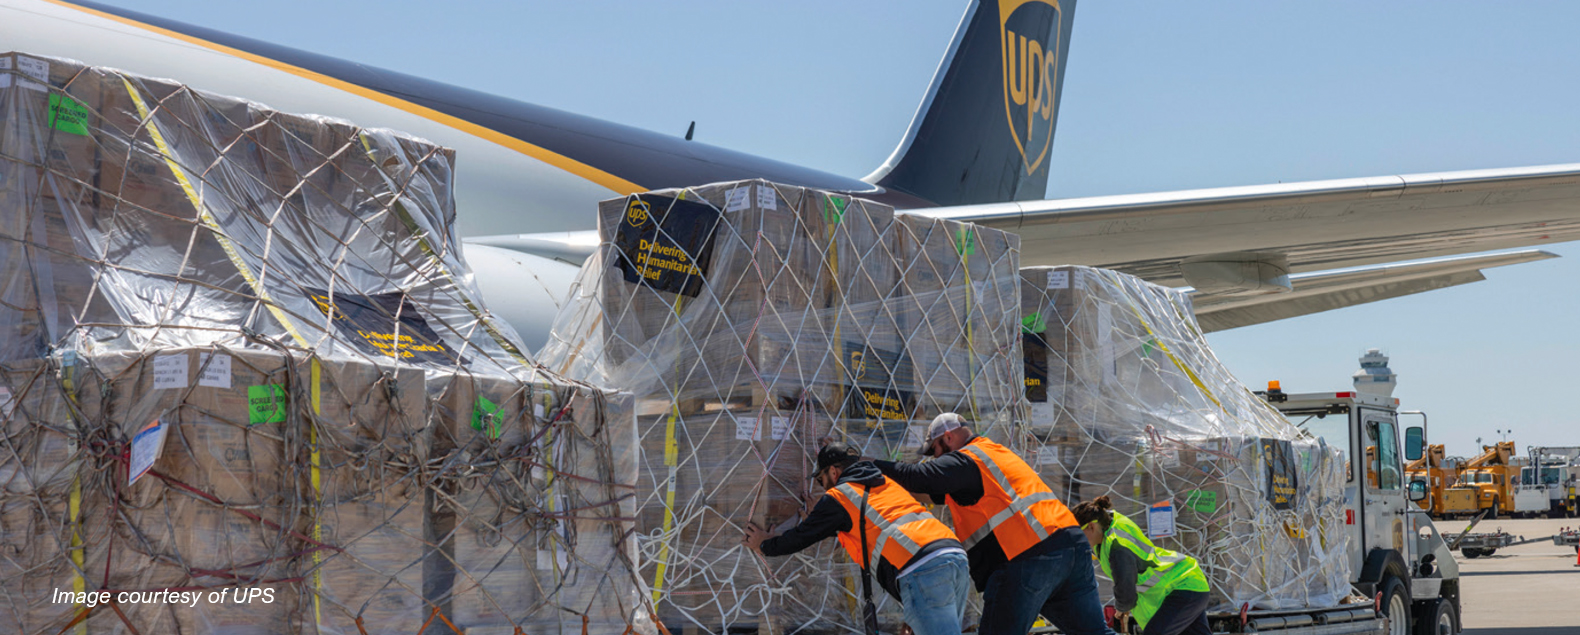 A large cargo plane partnering with the private sector during a health emergency.